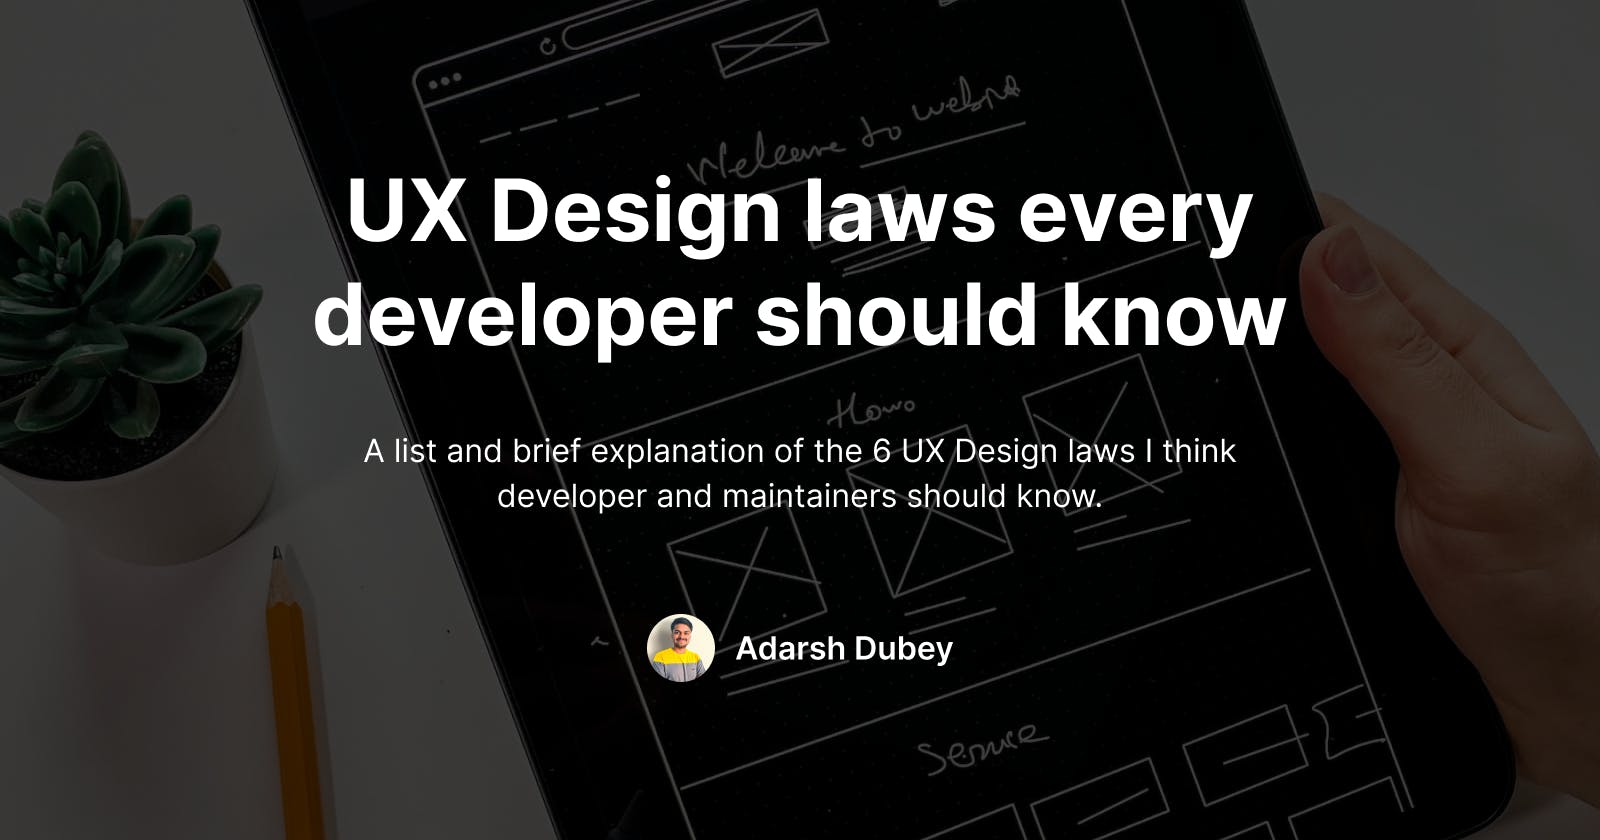 UX Design laws every developer should know